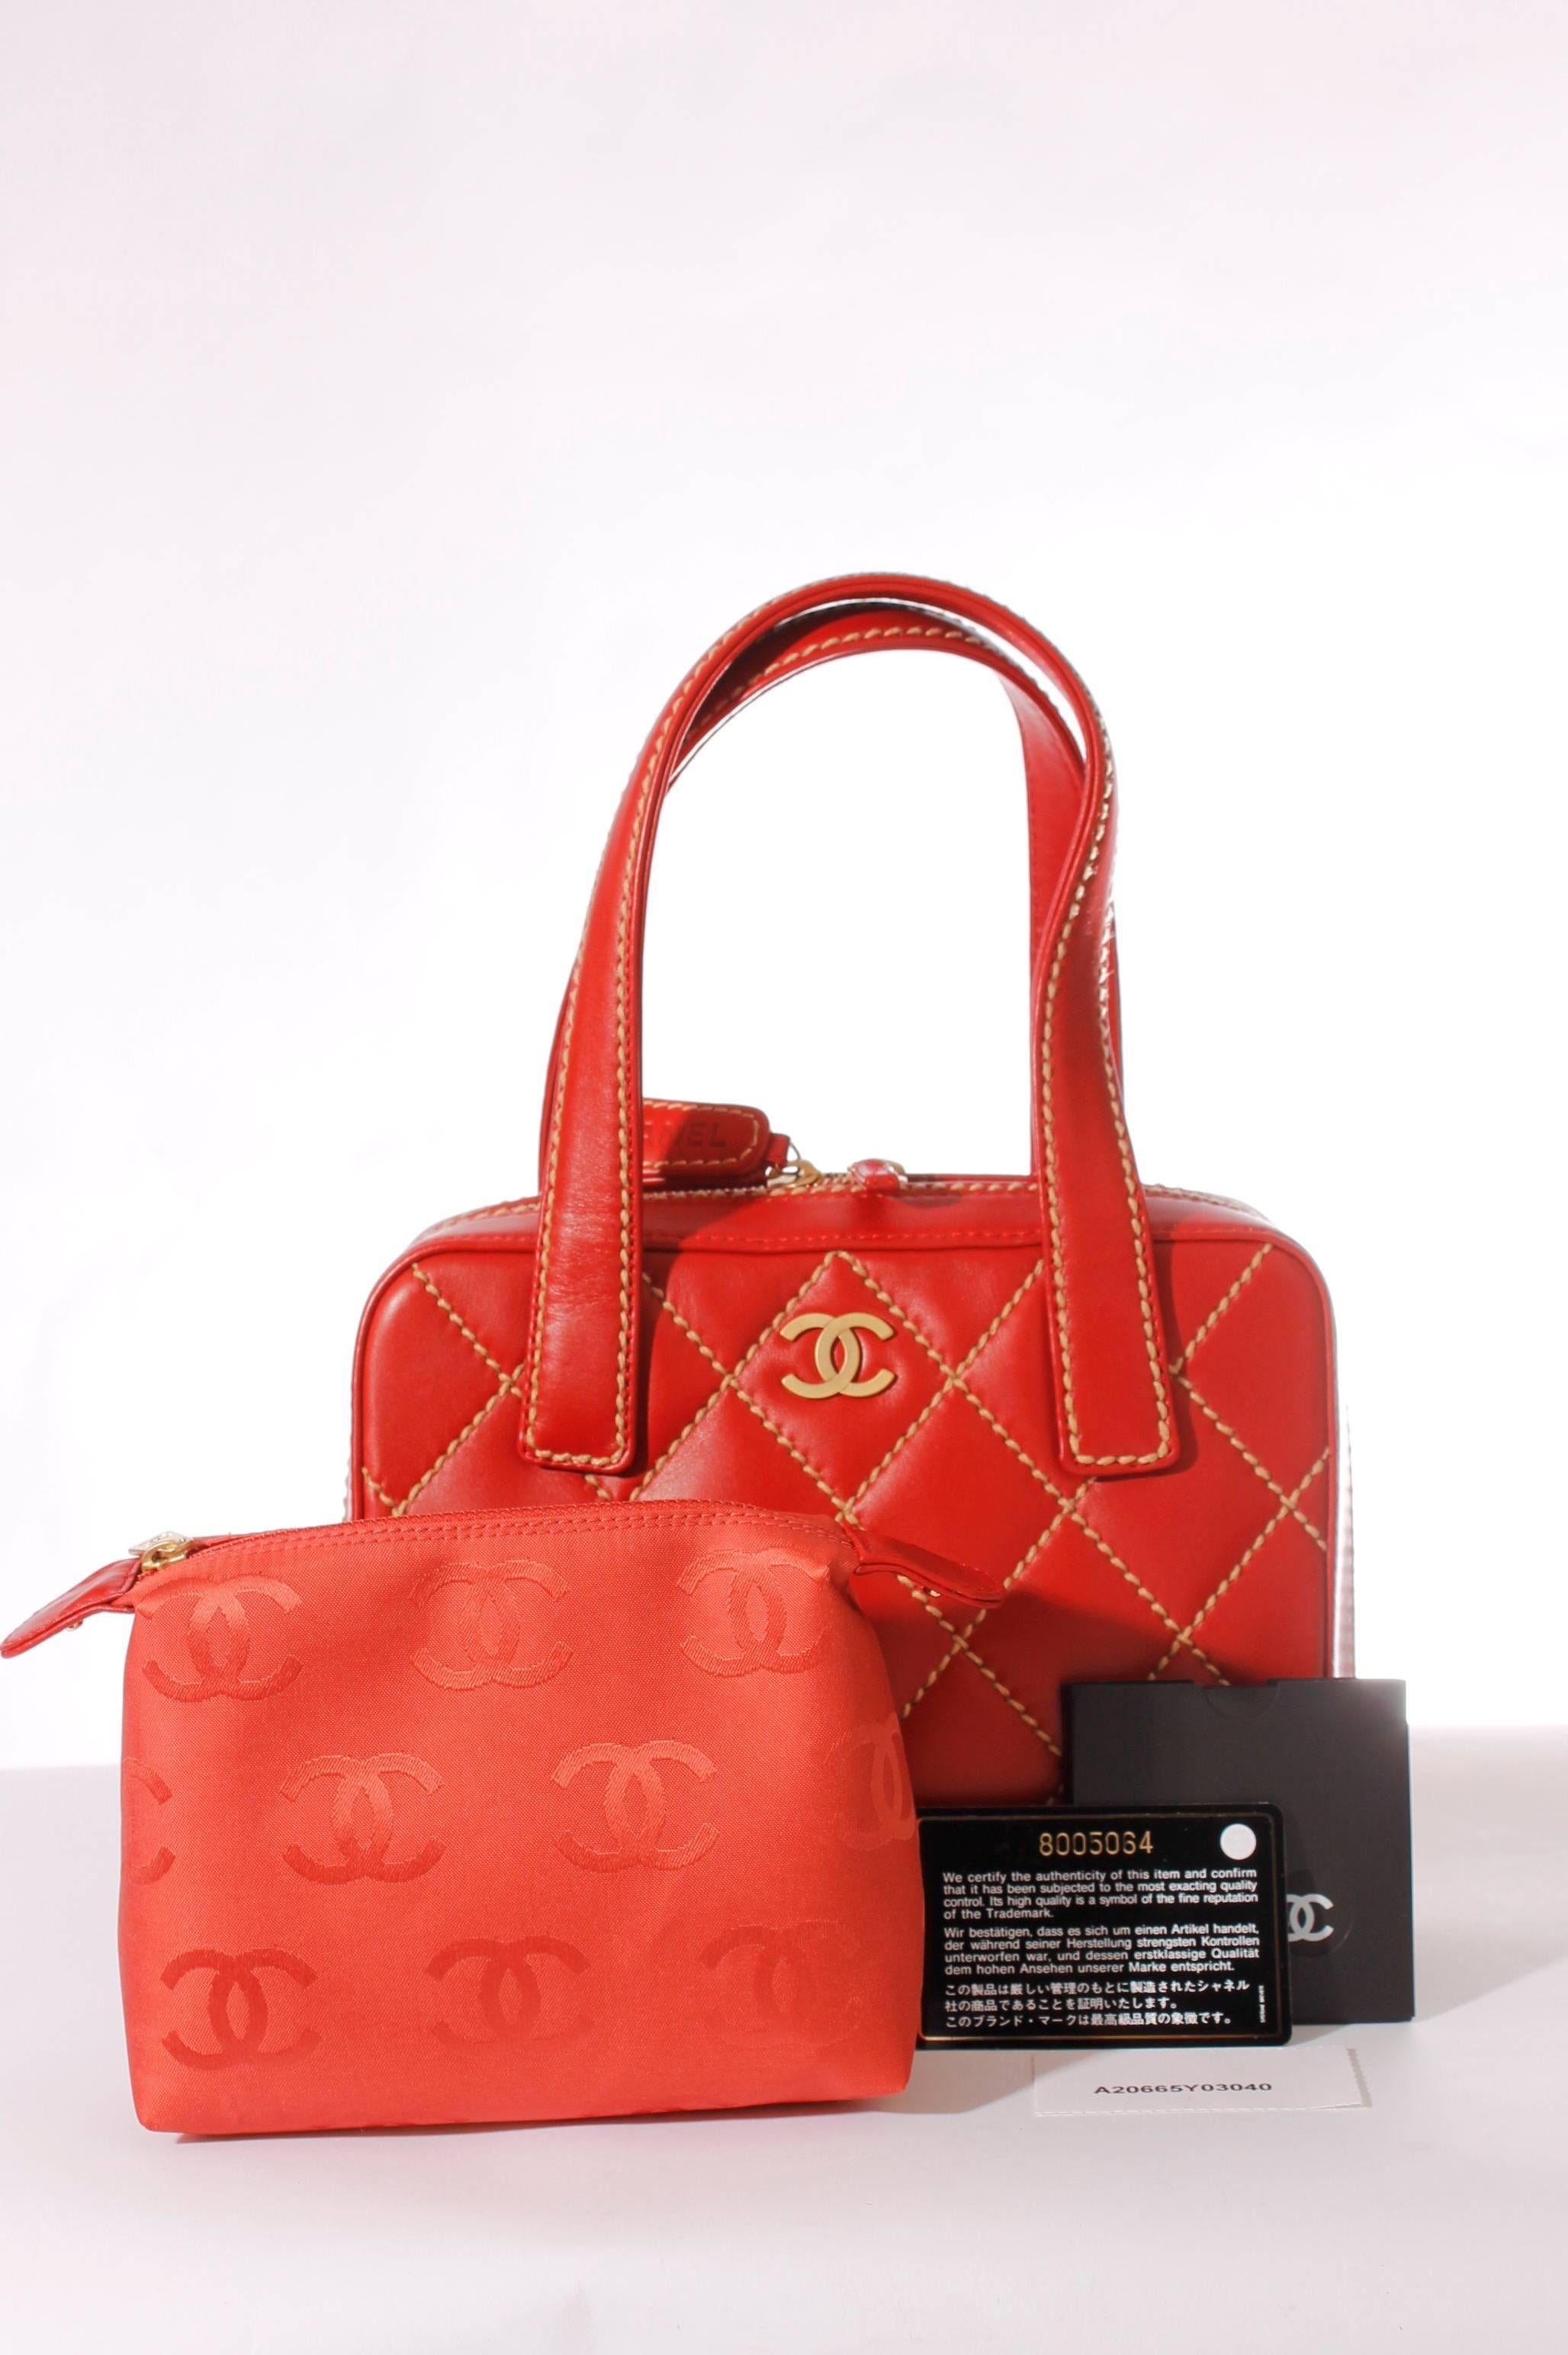 This is the Chanel Wild Stitch Quilted Zip Tote Bag in beautifully red calfskin leather.

On top a long golden 2-way zipper, one of the runners has a little strap of leather, the other has a large label. The word CHANEL is stamped on both sides of